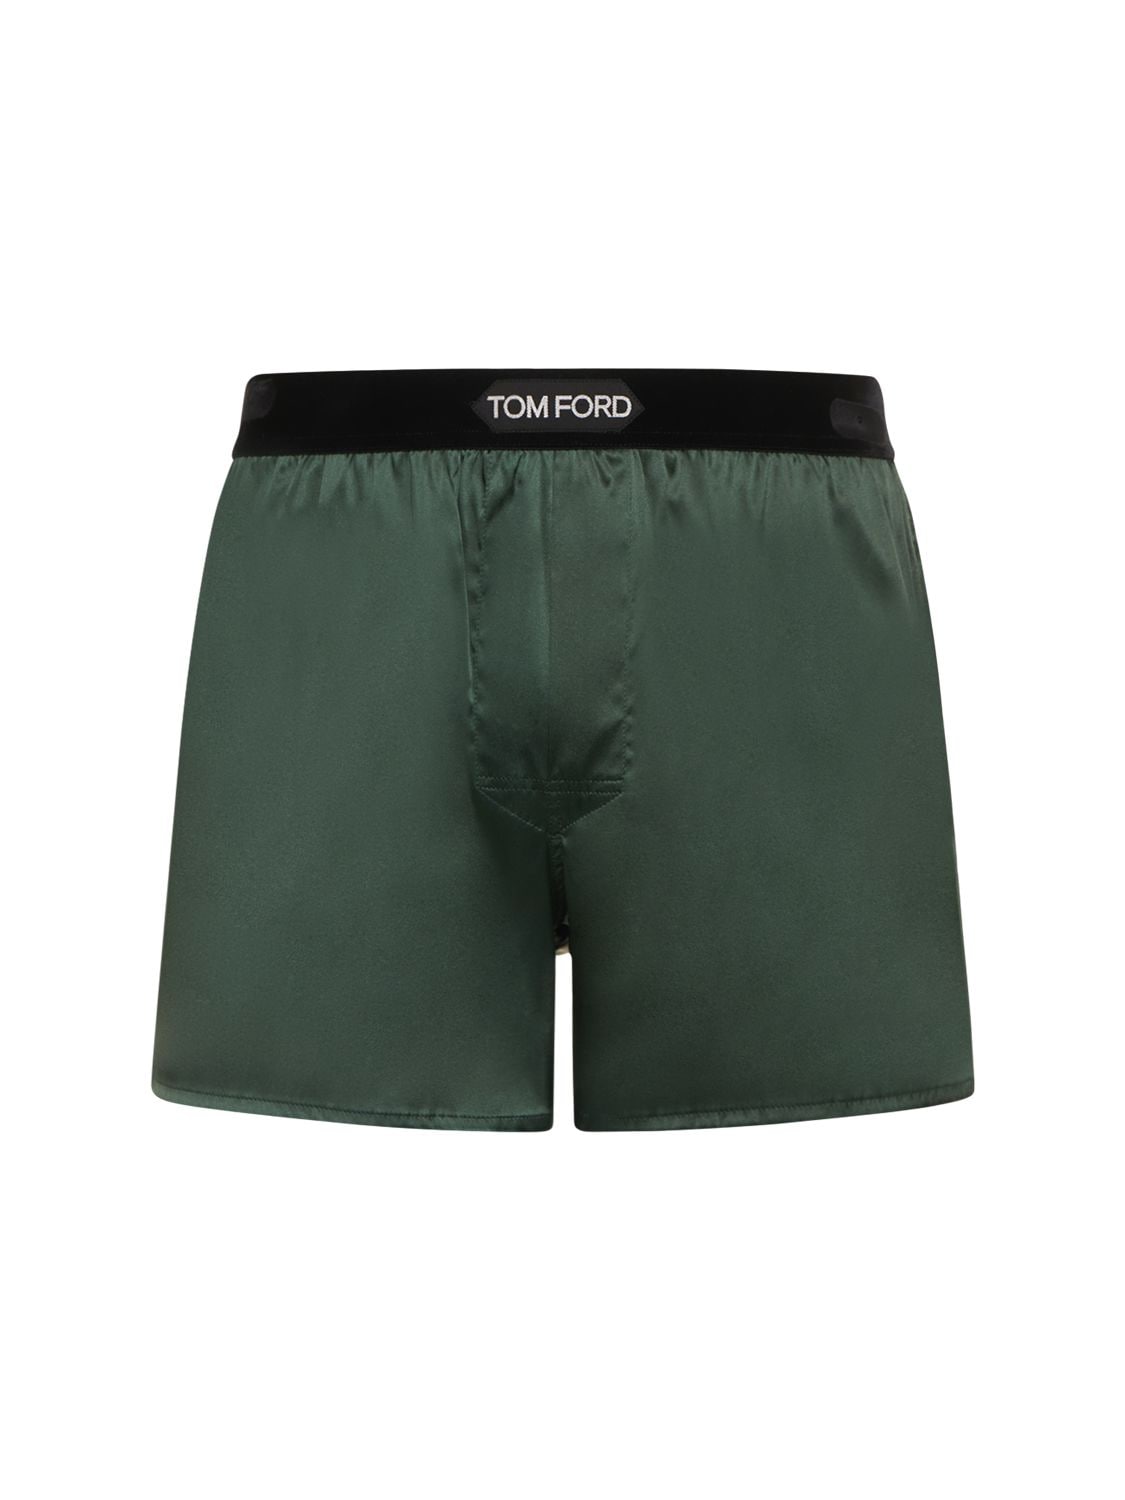 Tom Ford Silk Boxer Shorts In Jade